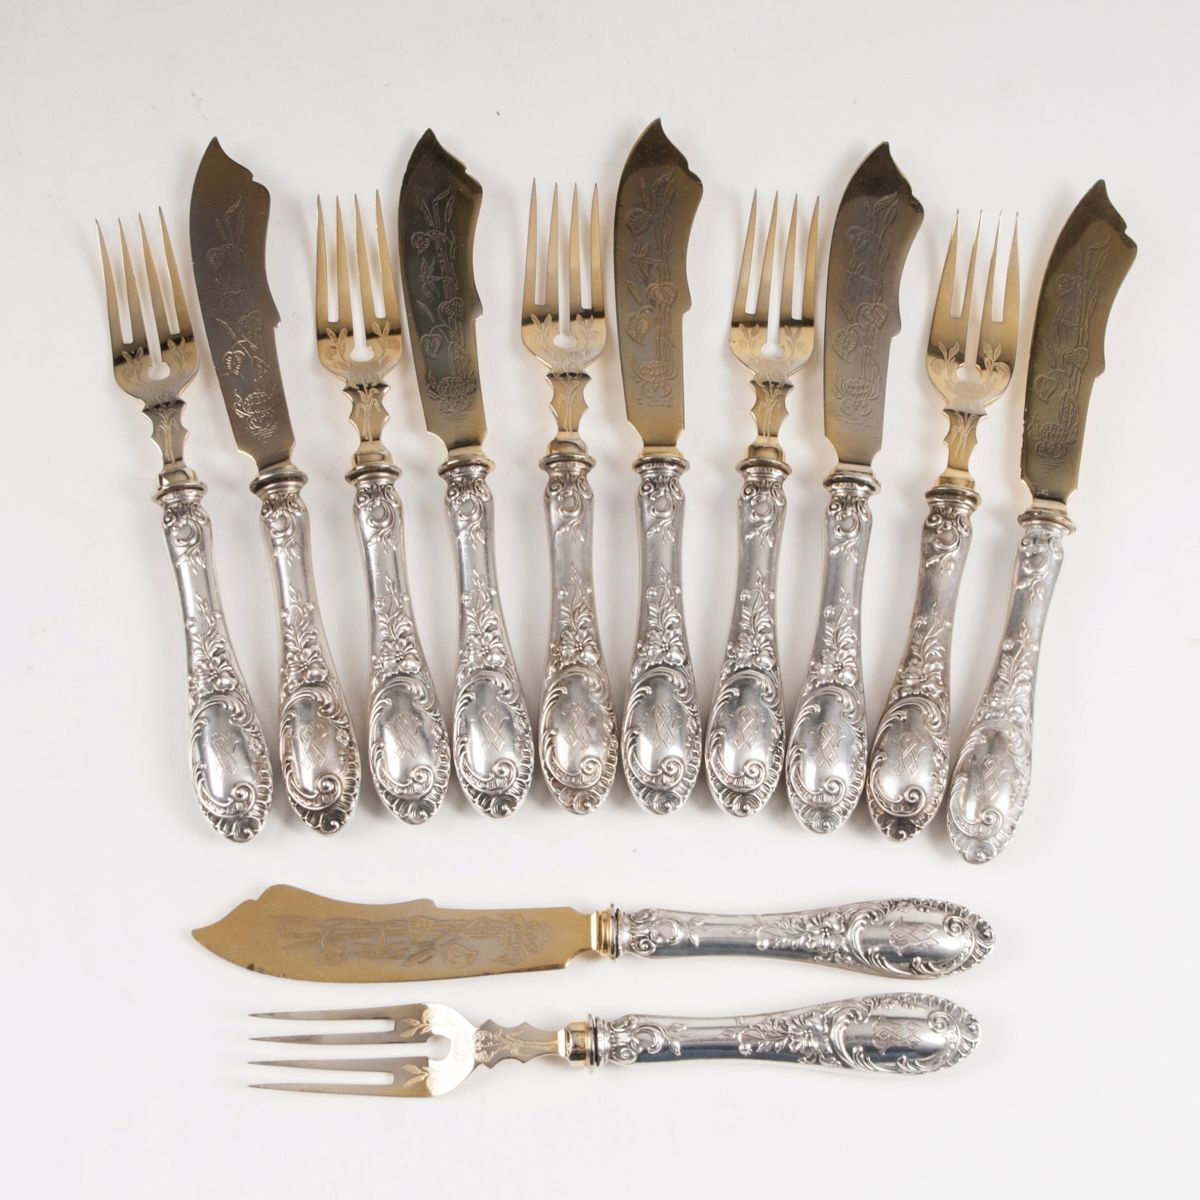 A richly decorated fish cutlery for 6 persons